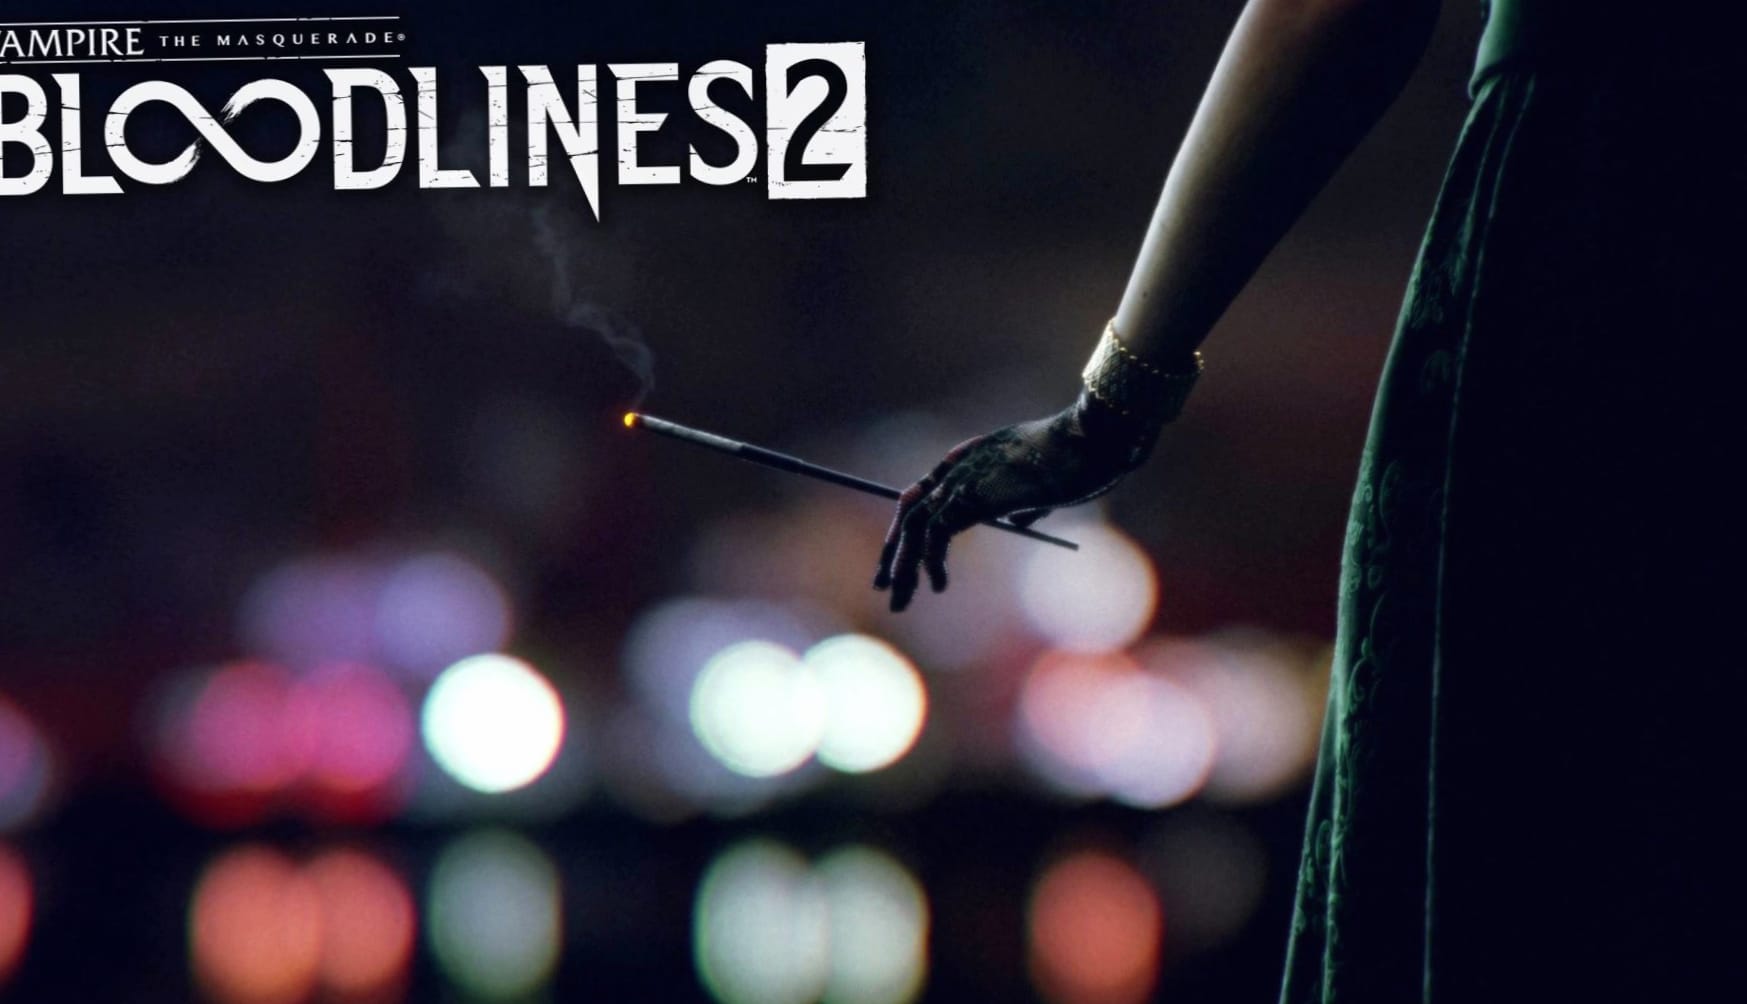 Vampire The Masquerade - Bloodlines 2 wallpapers HD quality